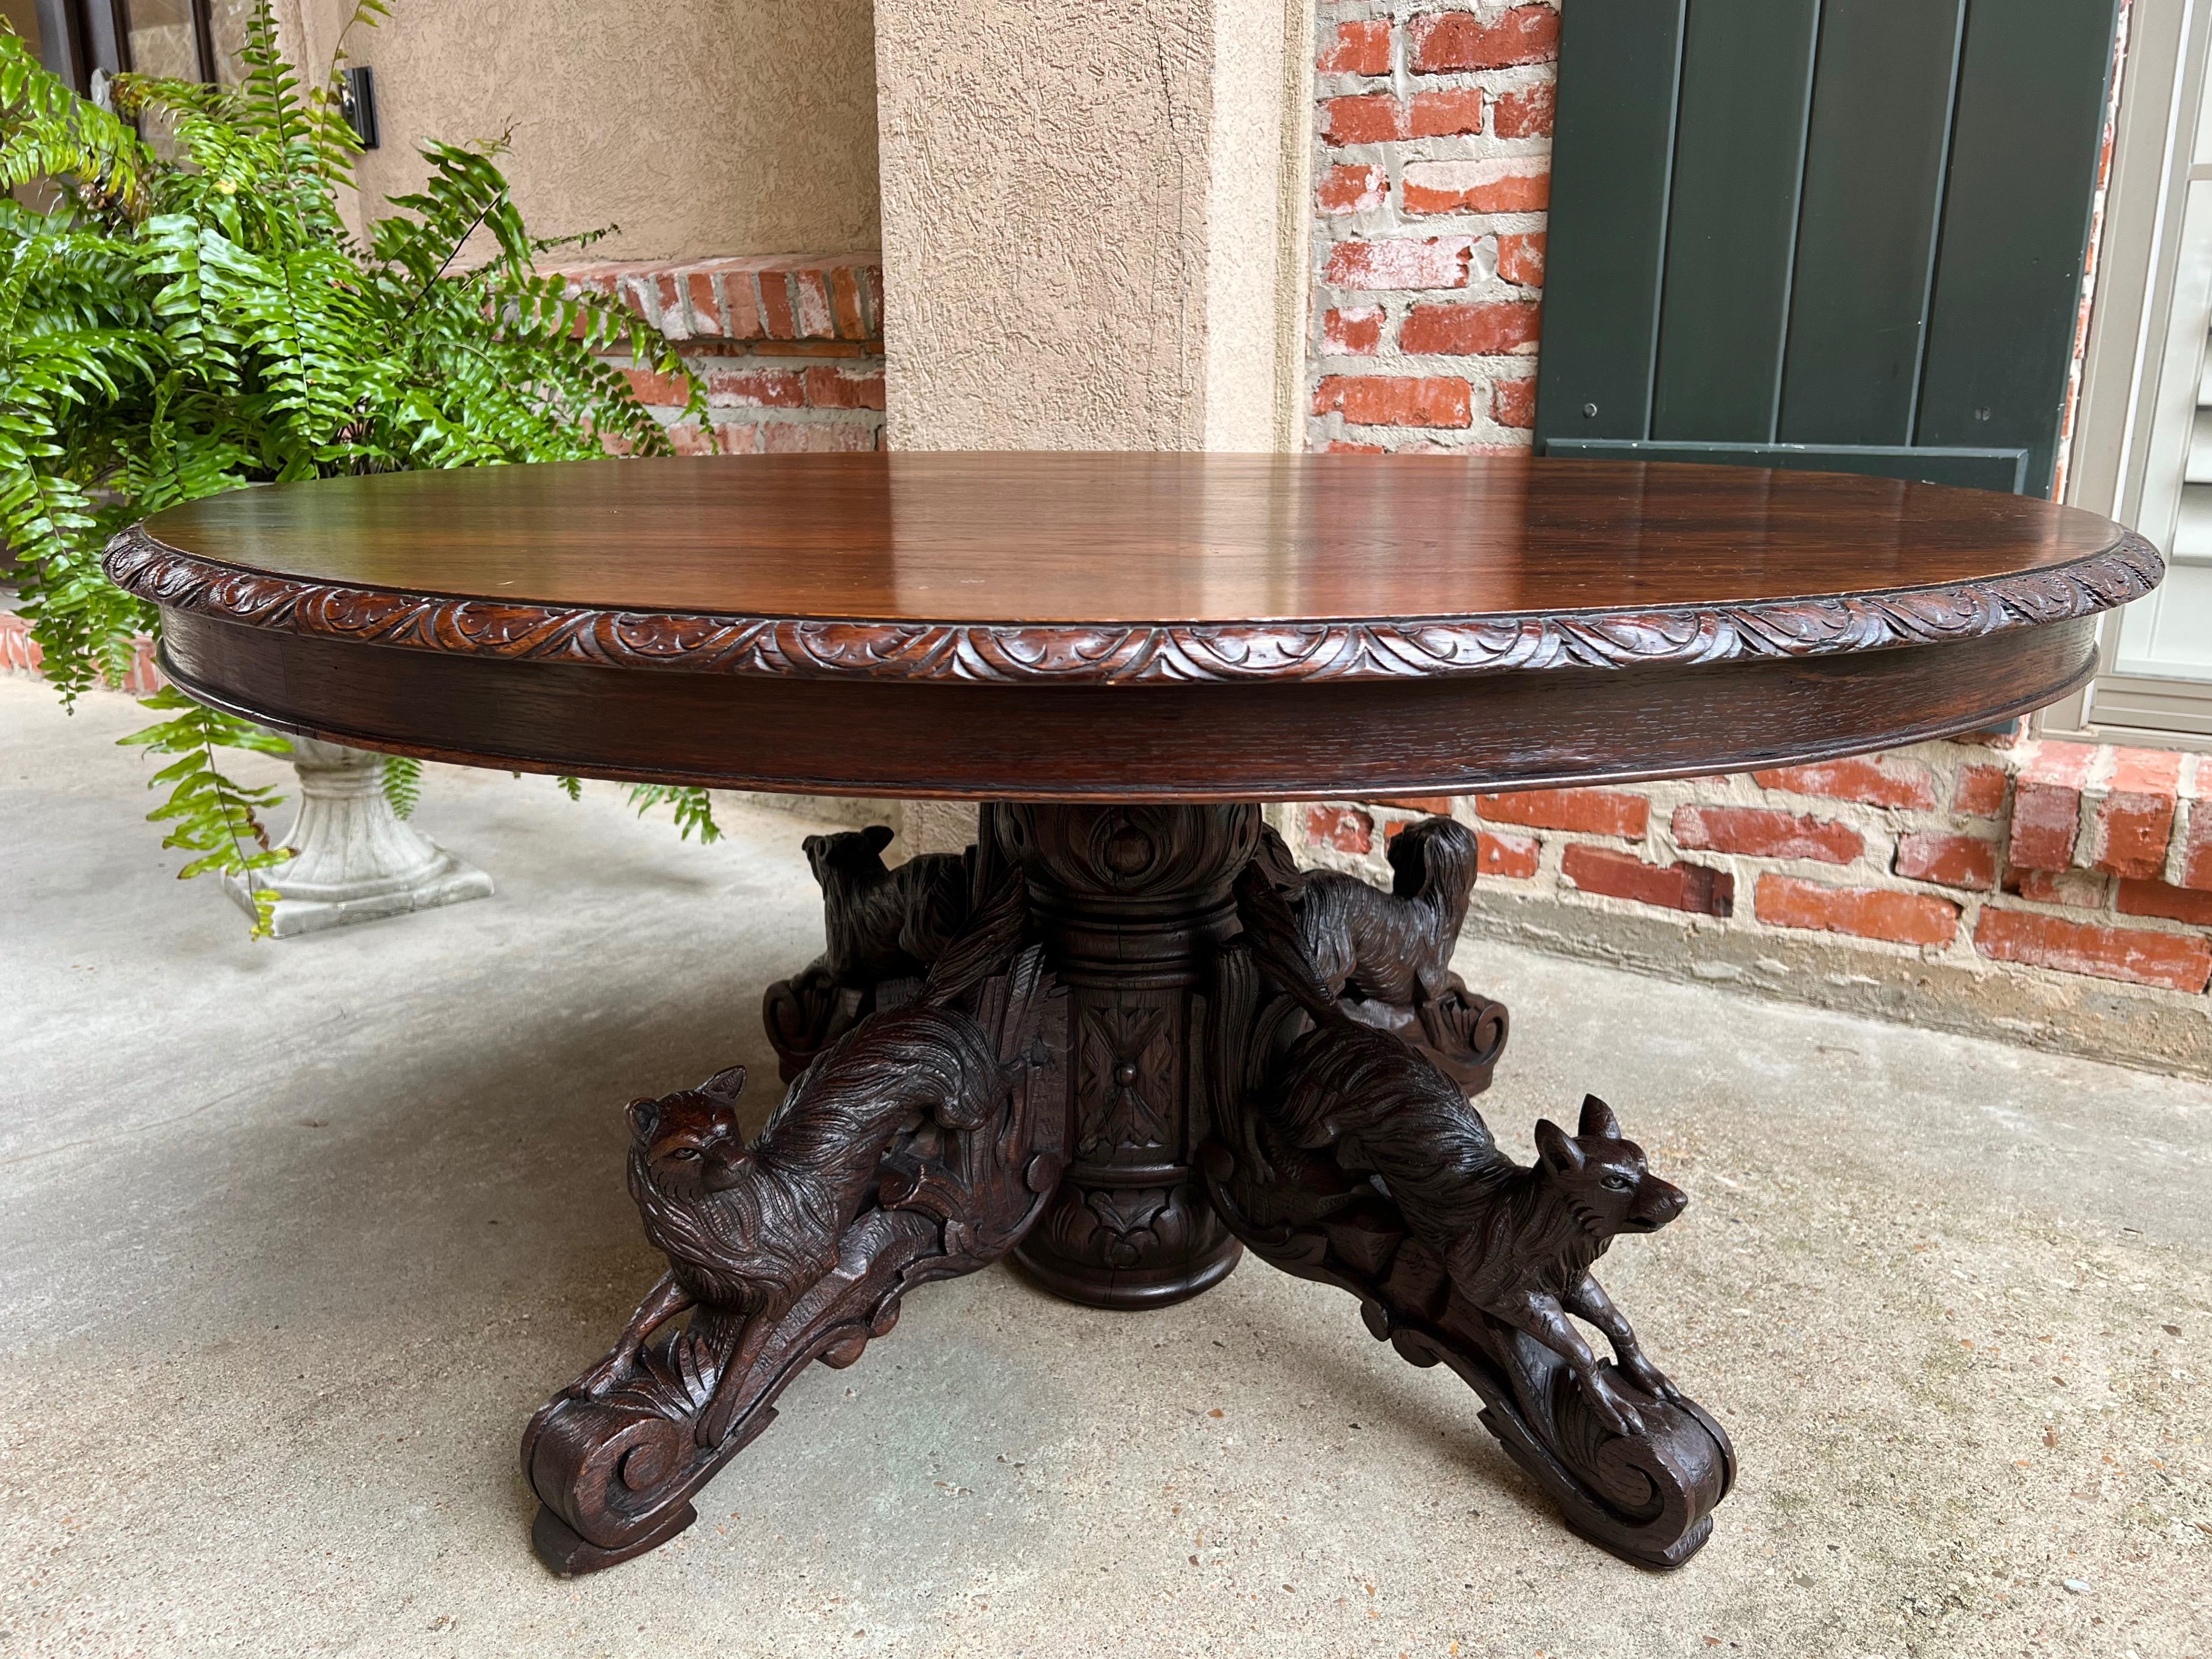 Antique French Carved Oak Hunt Oval Coffee Sofa Table Black Forest Lodge Boar/Fox/Hound.

Direct from France, a majestic and substantial antique French “hunt” oval coffee table. Stunning hand carved details; one glance reveals the superior quality